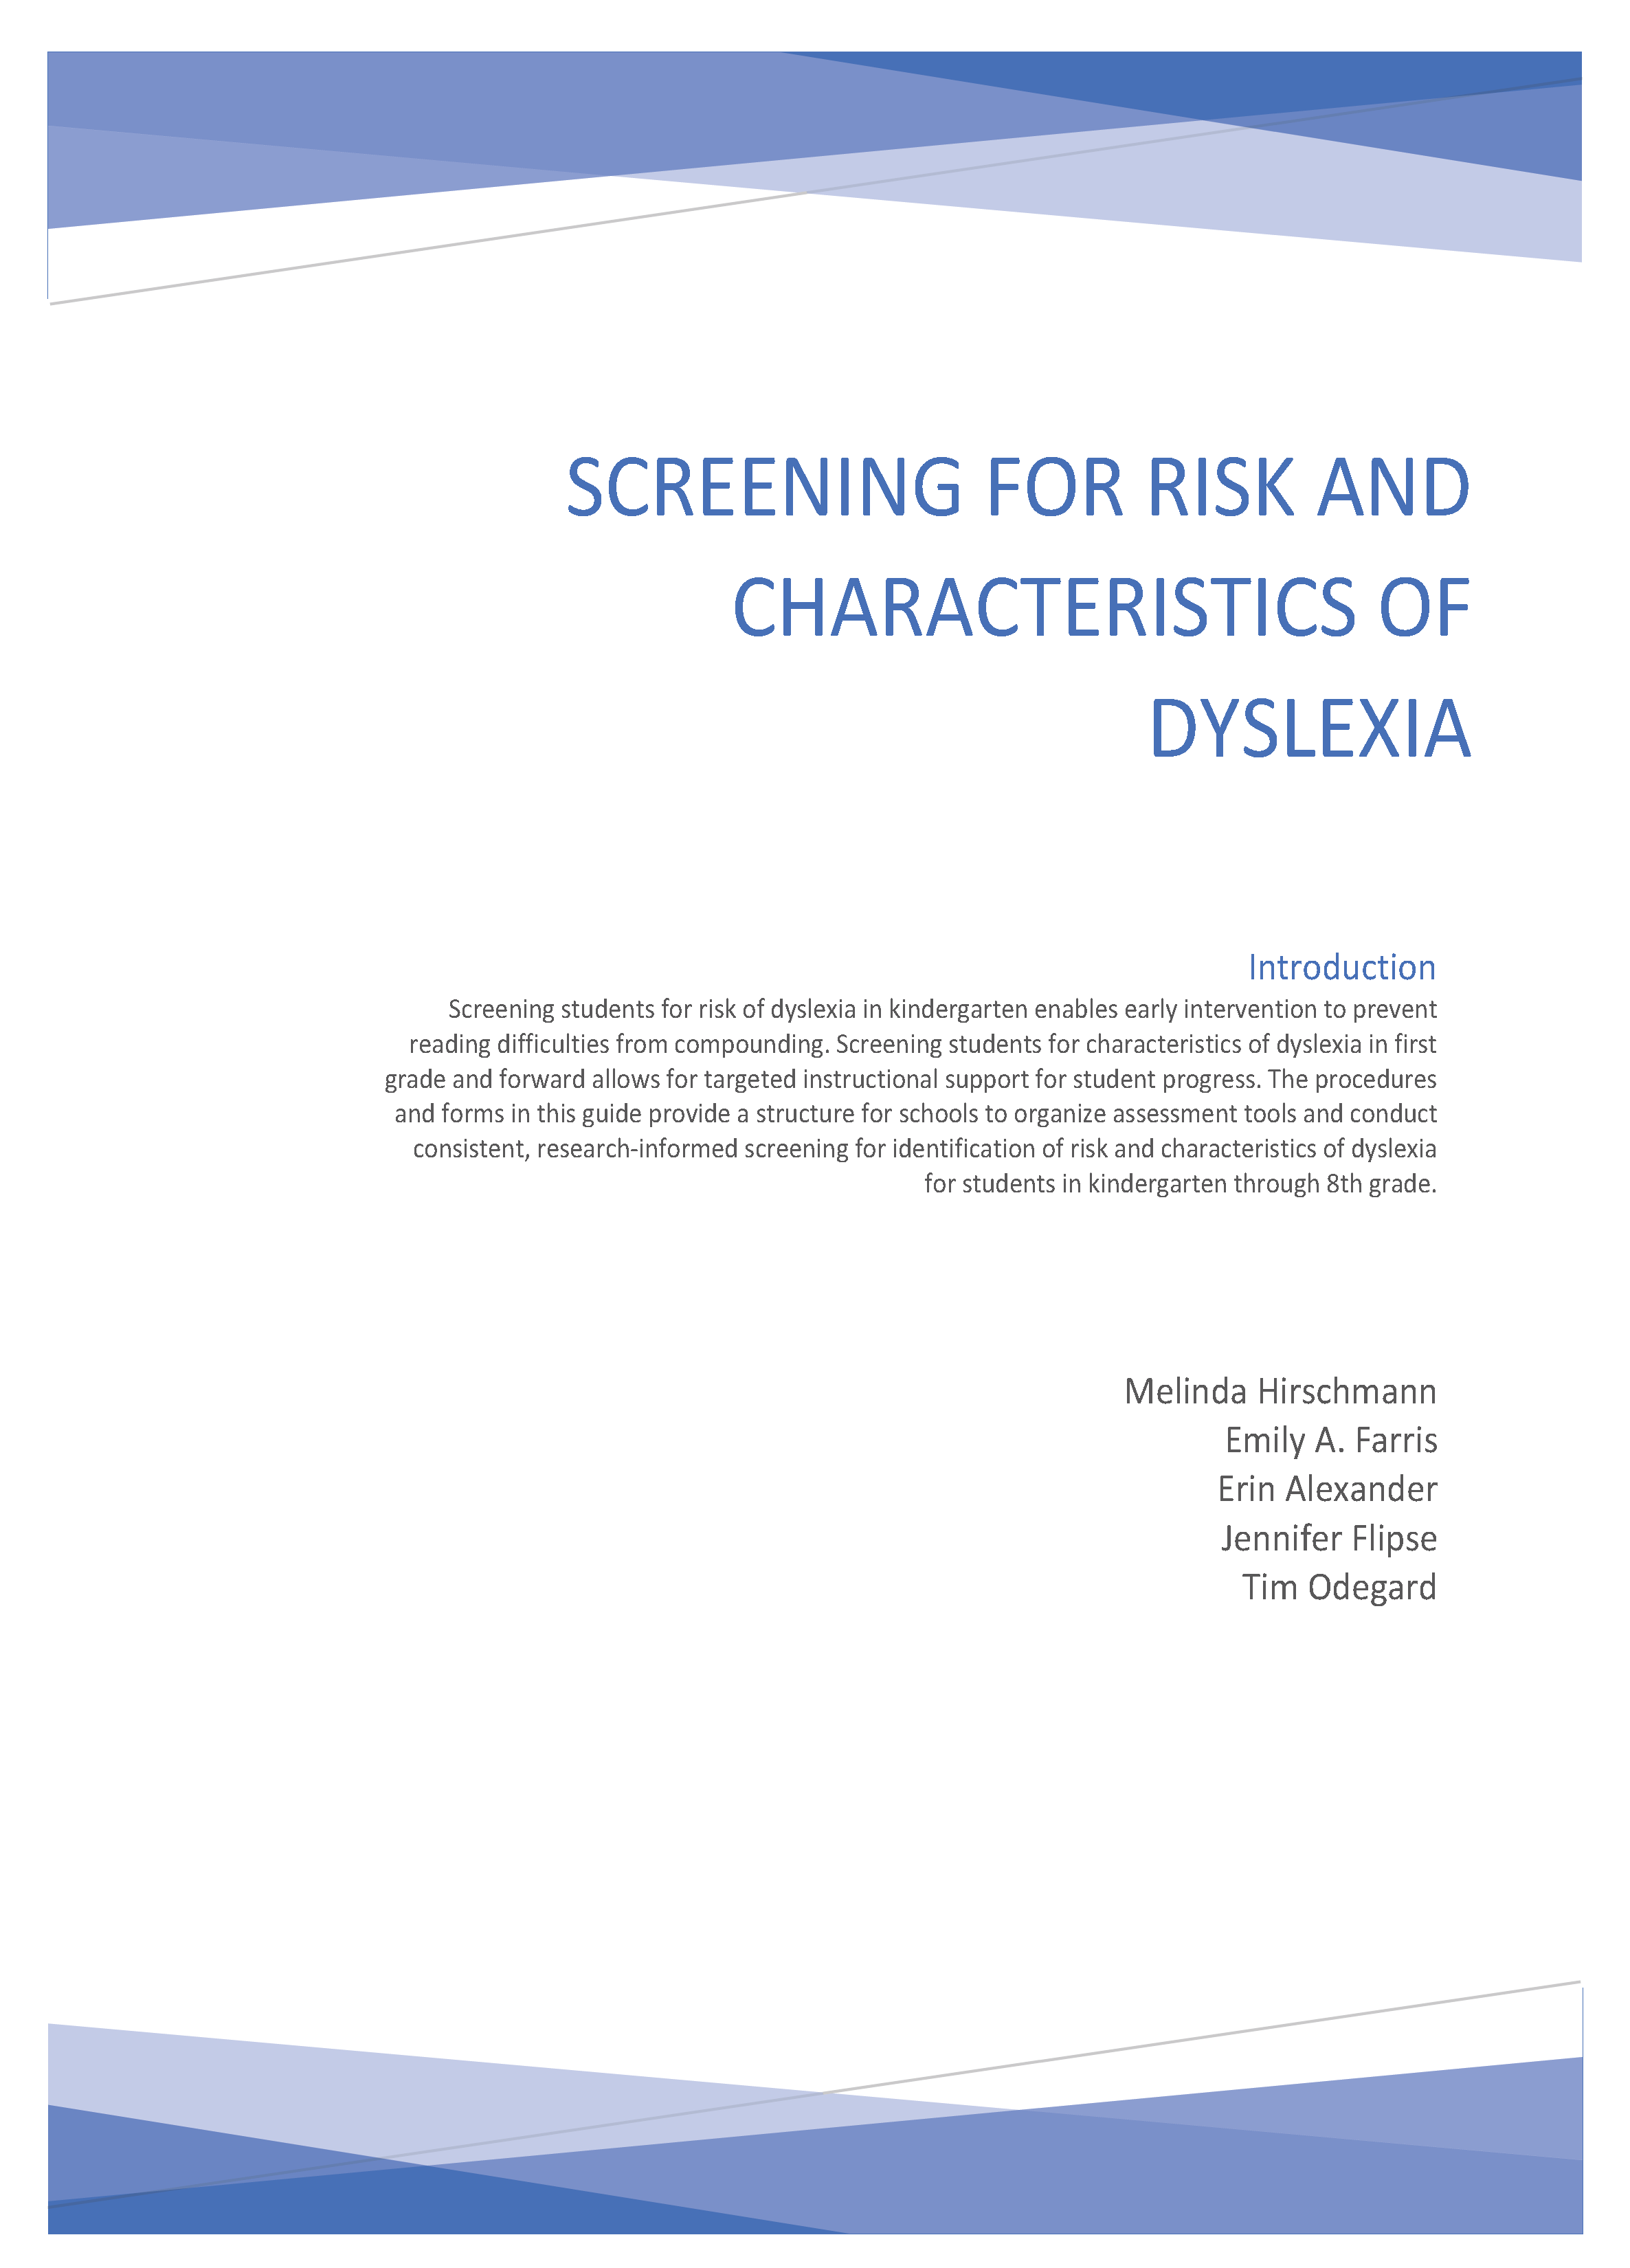 Screening for Risks and Characteristics of Dyslexia Cover Image